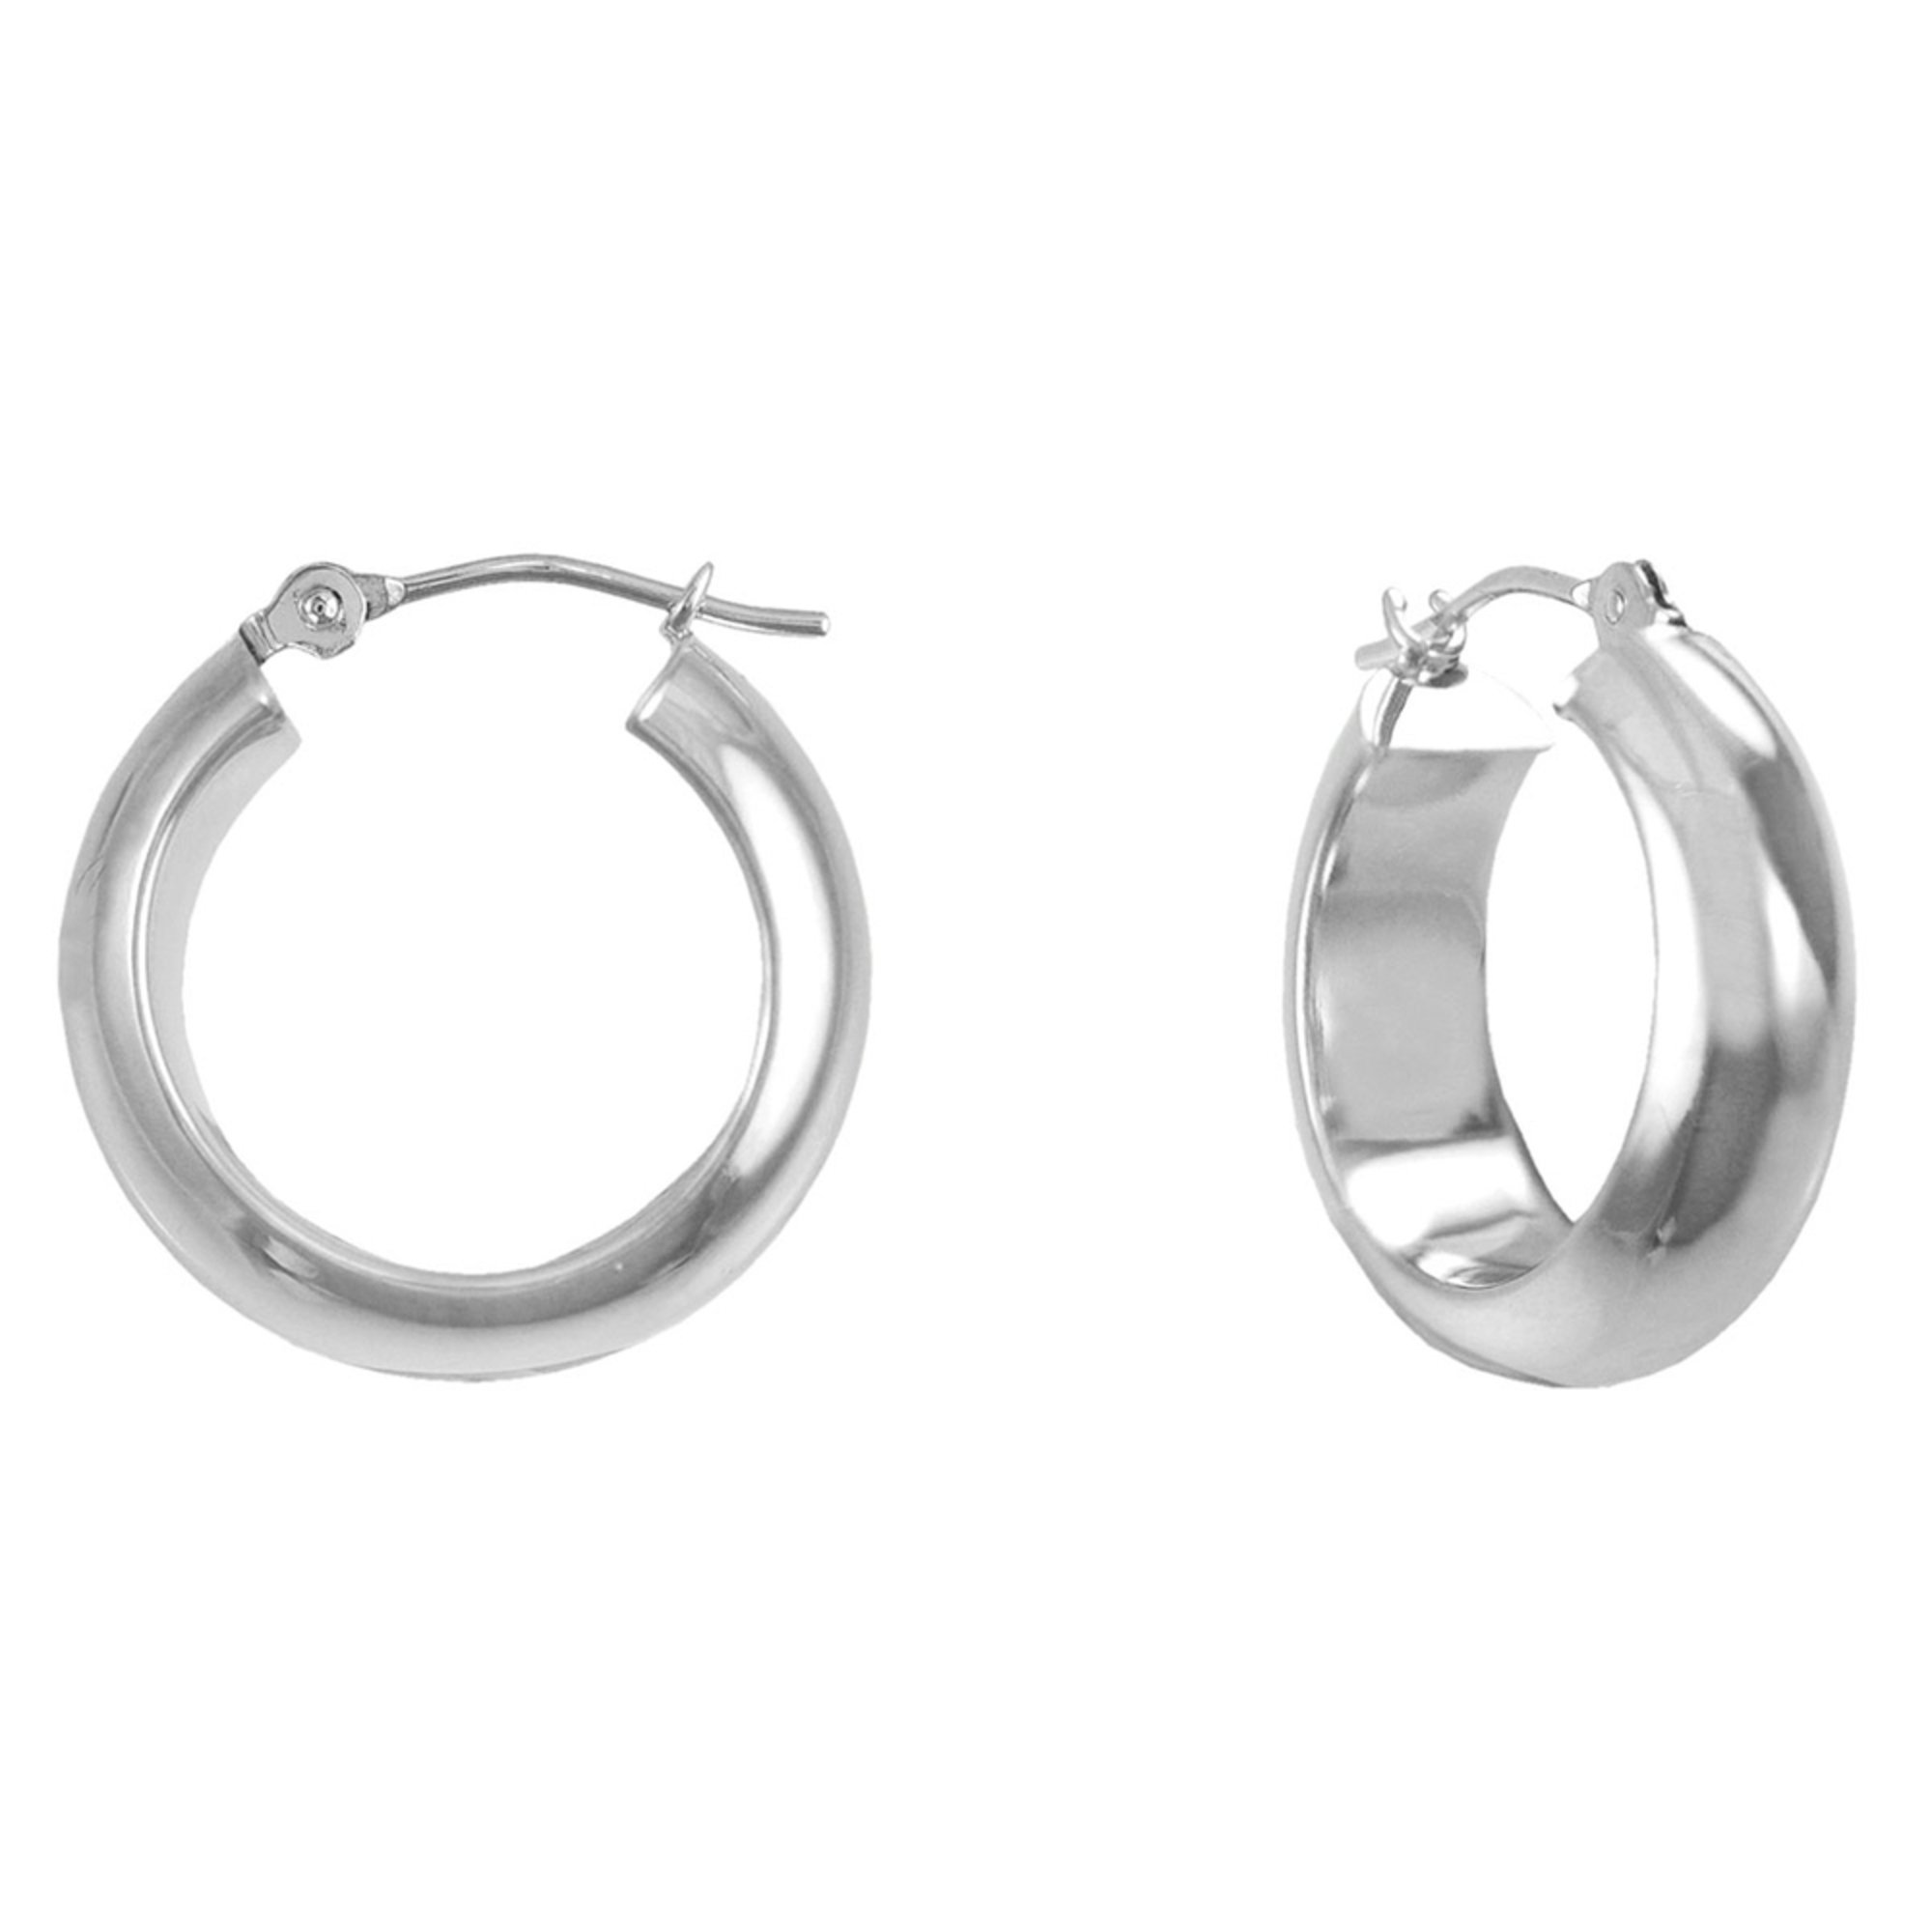 14k White Gold Hoop Earrings | Gold Earrings | Accessories - Shop Your Navy Exchange - Official Site